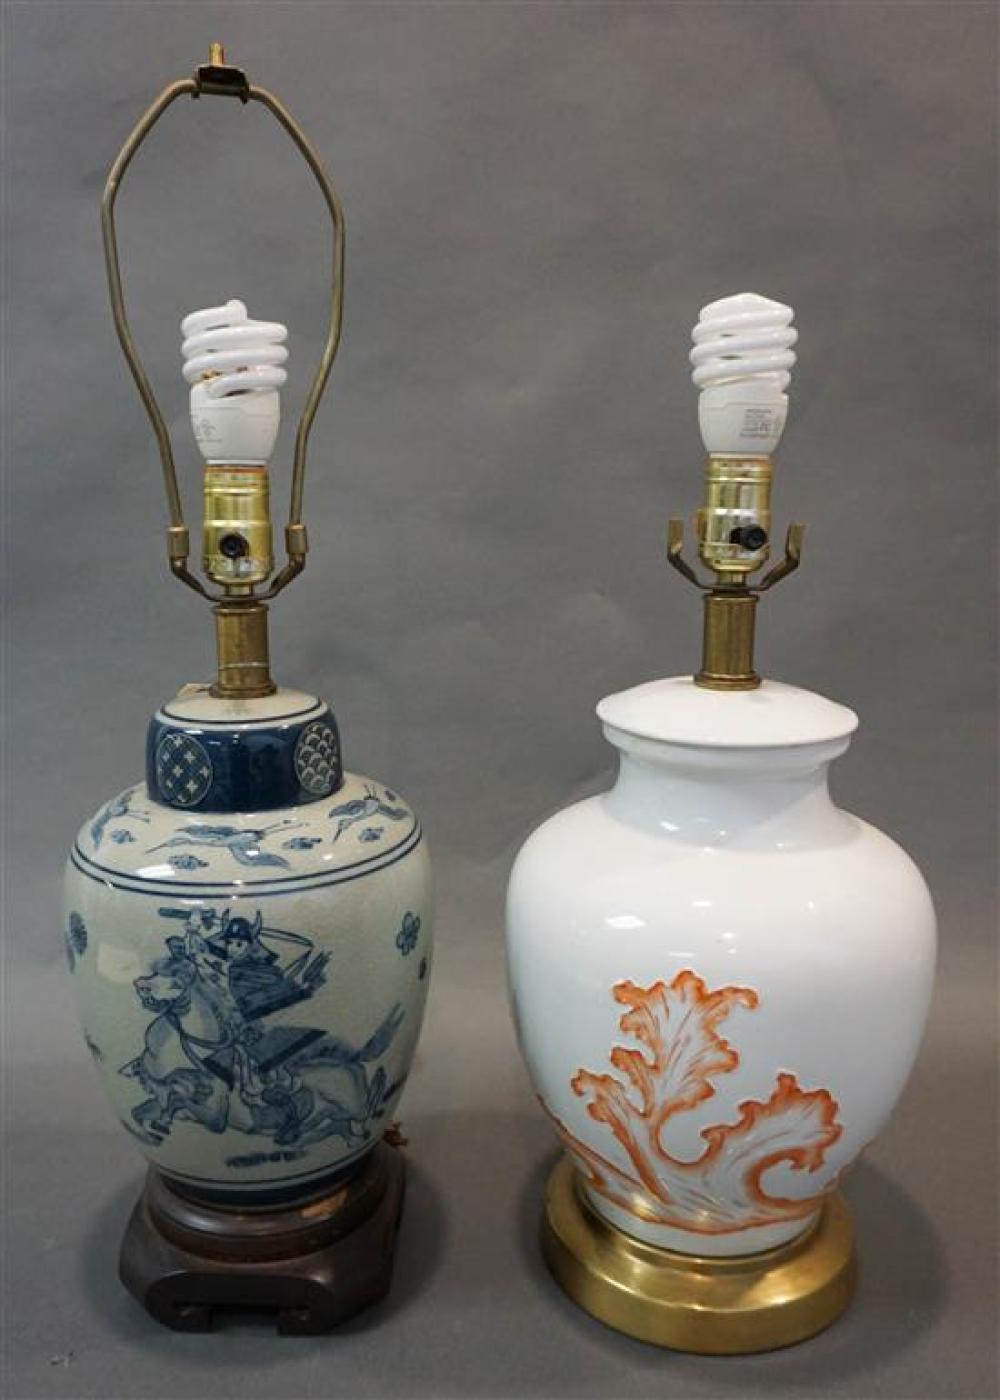 TWO JAPANESE PORCELAIN TABLE LAMPSTwo